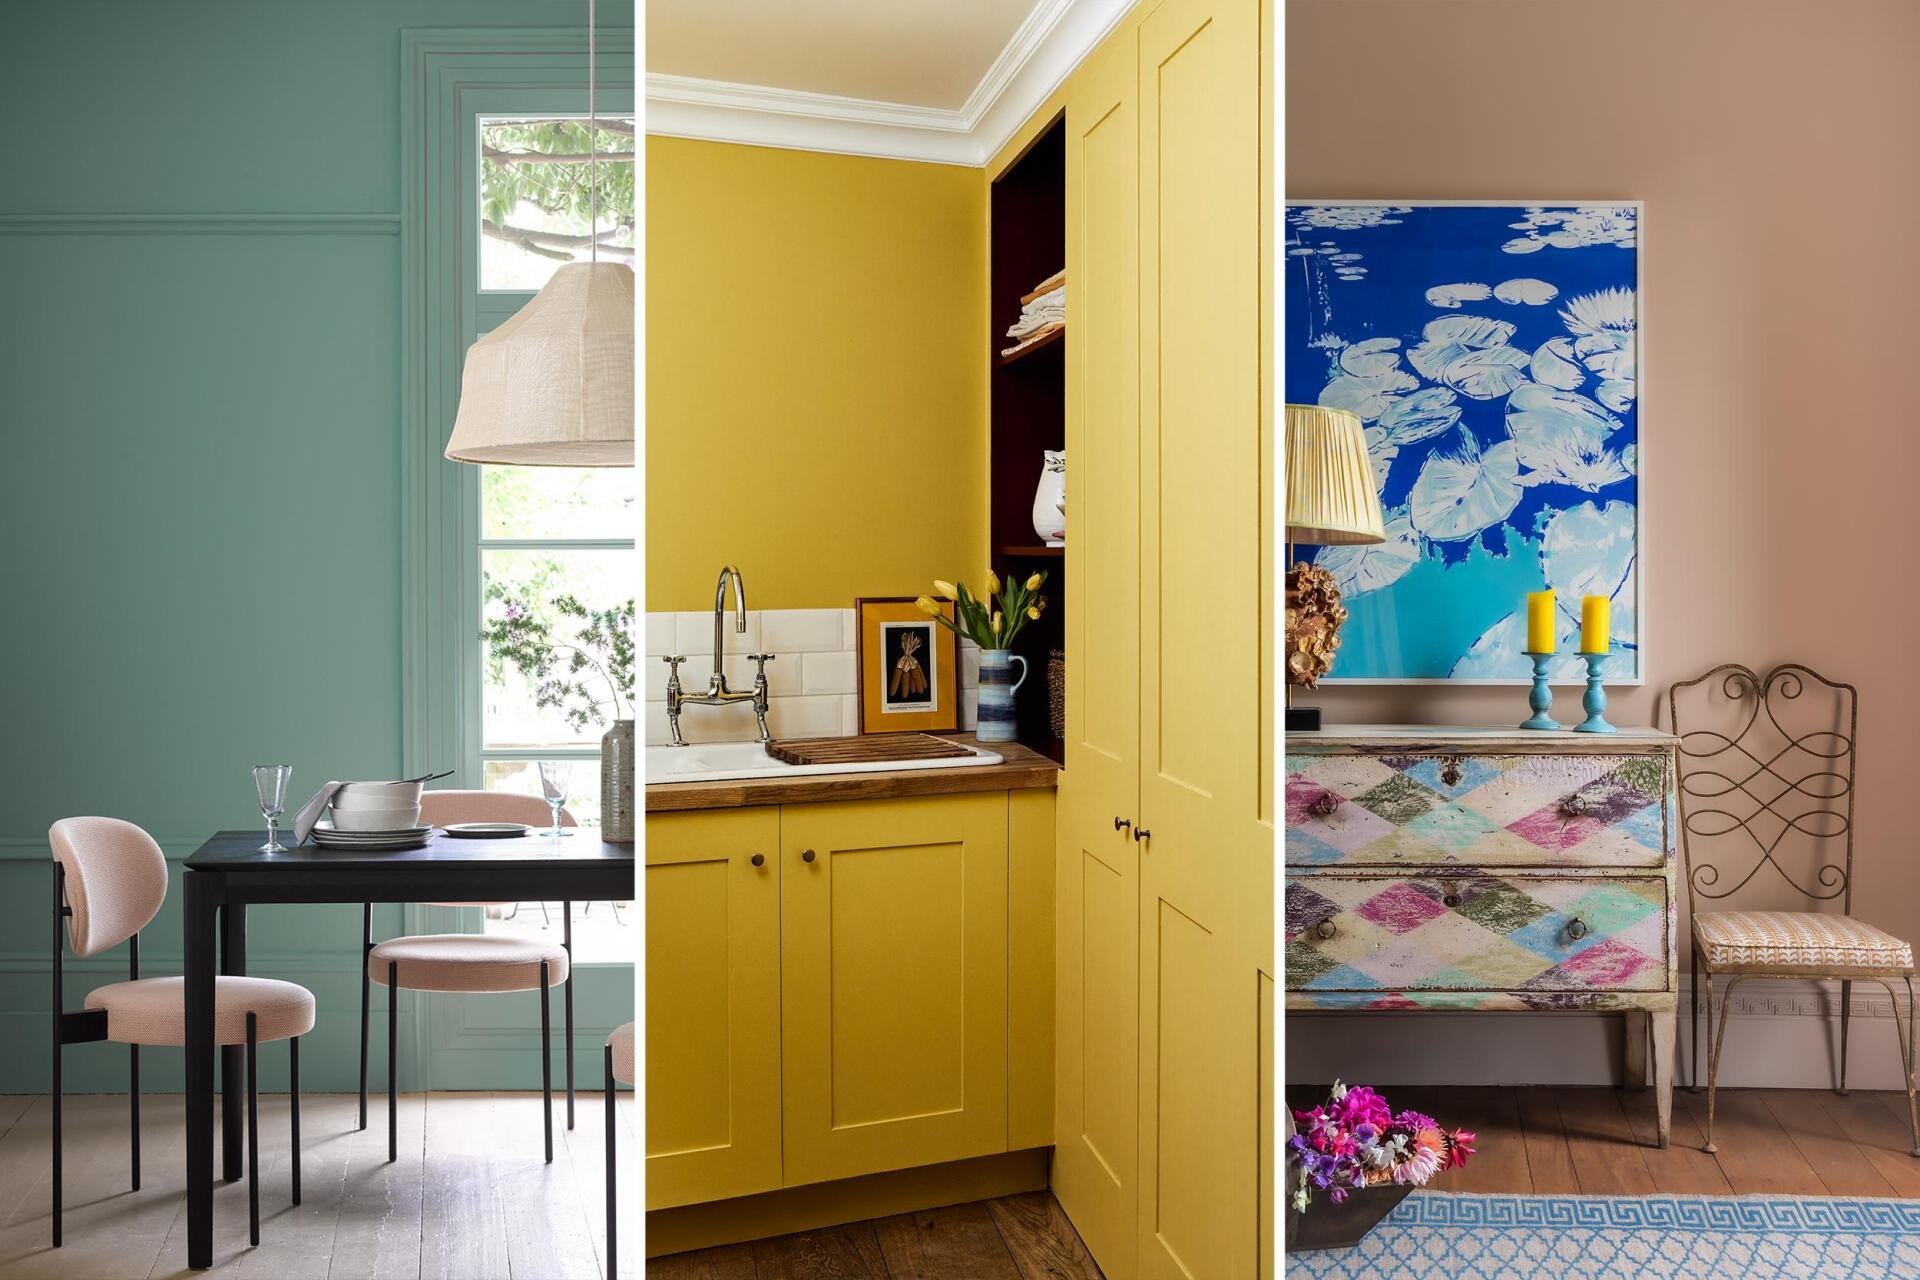 Colour Trends: The Psychology Behind Decorating Your Home